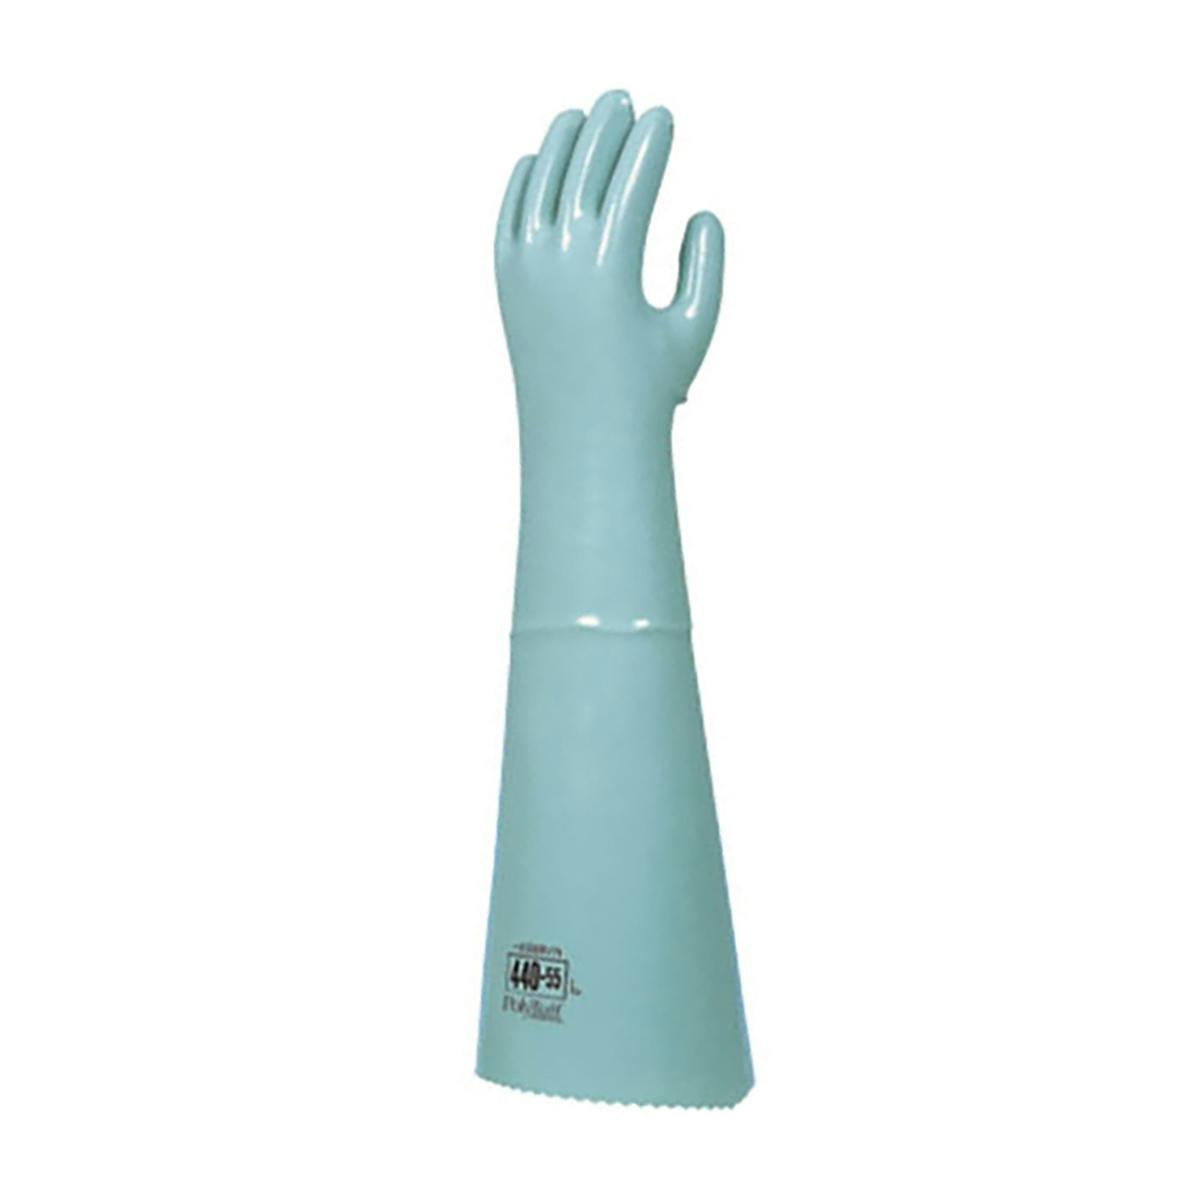 Polyurethane Solvent Glove with Cotton Lining - 21", Green (440-55) - L